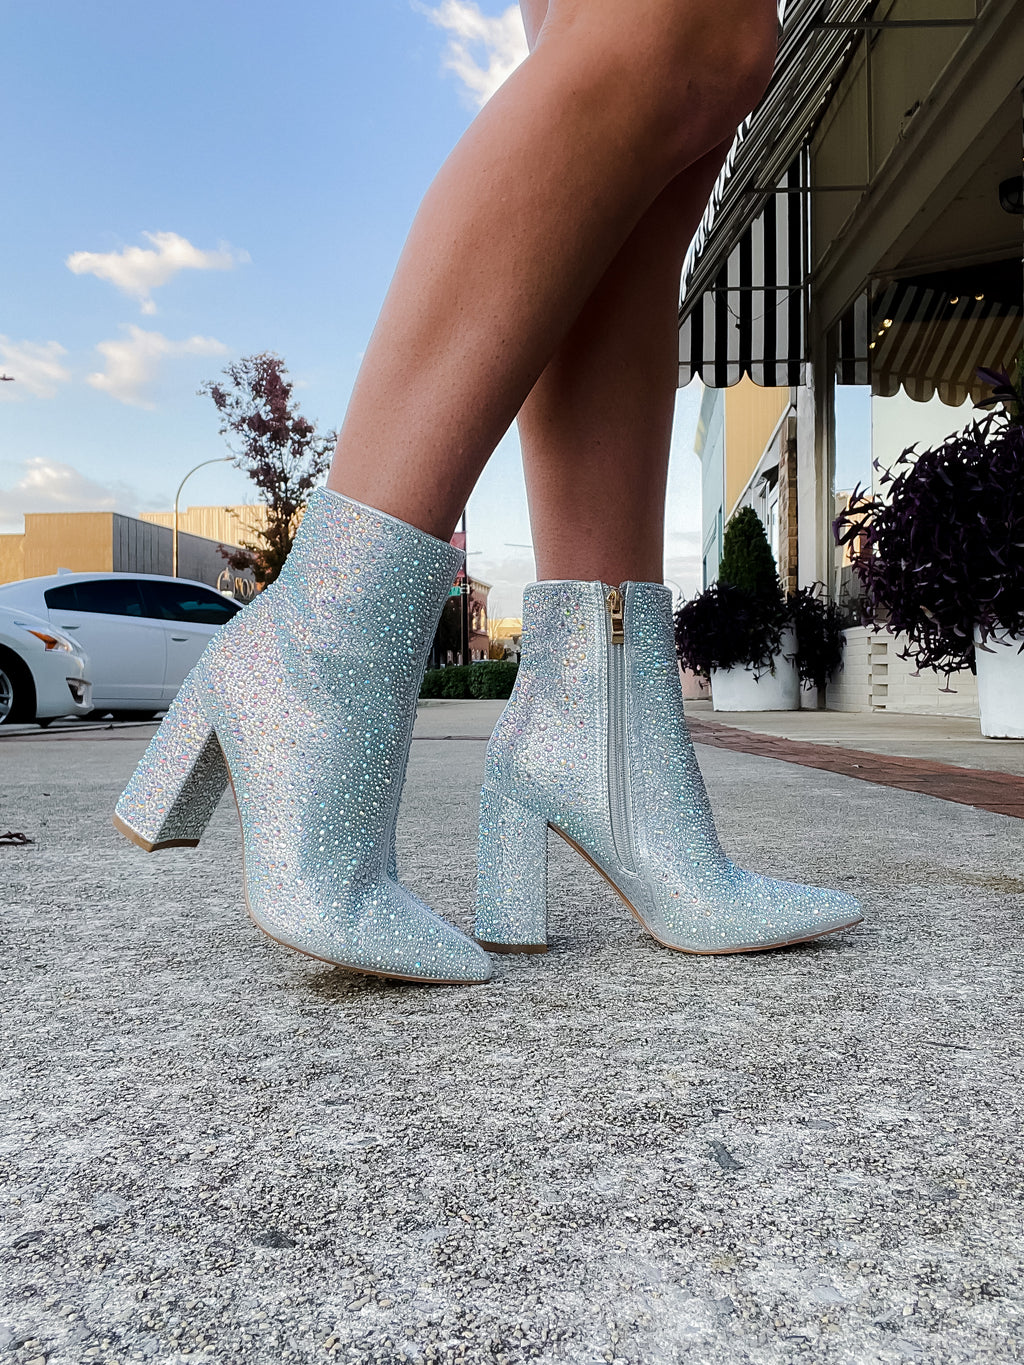 Booties feature a show stopping appearance, block heel, full sequin/rhinestone detailing, side zip-up closure and runs true to size! -silver